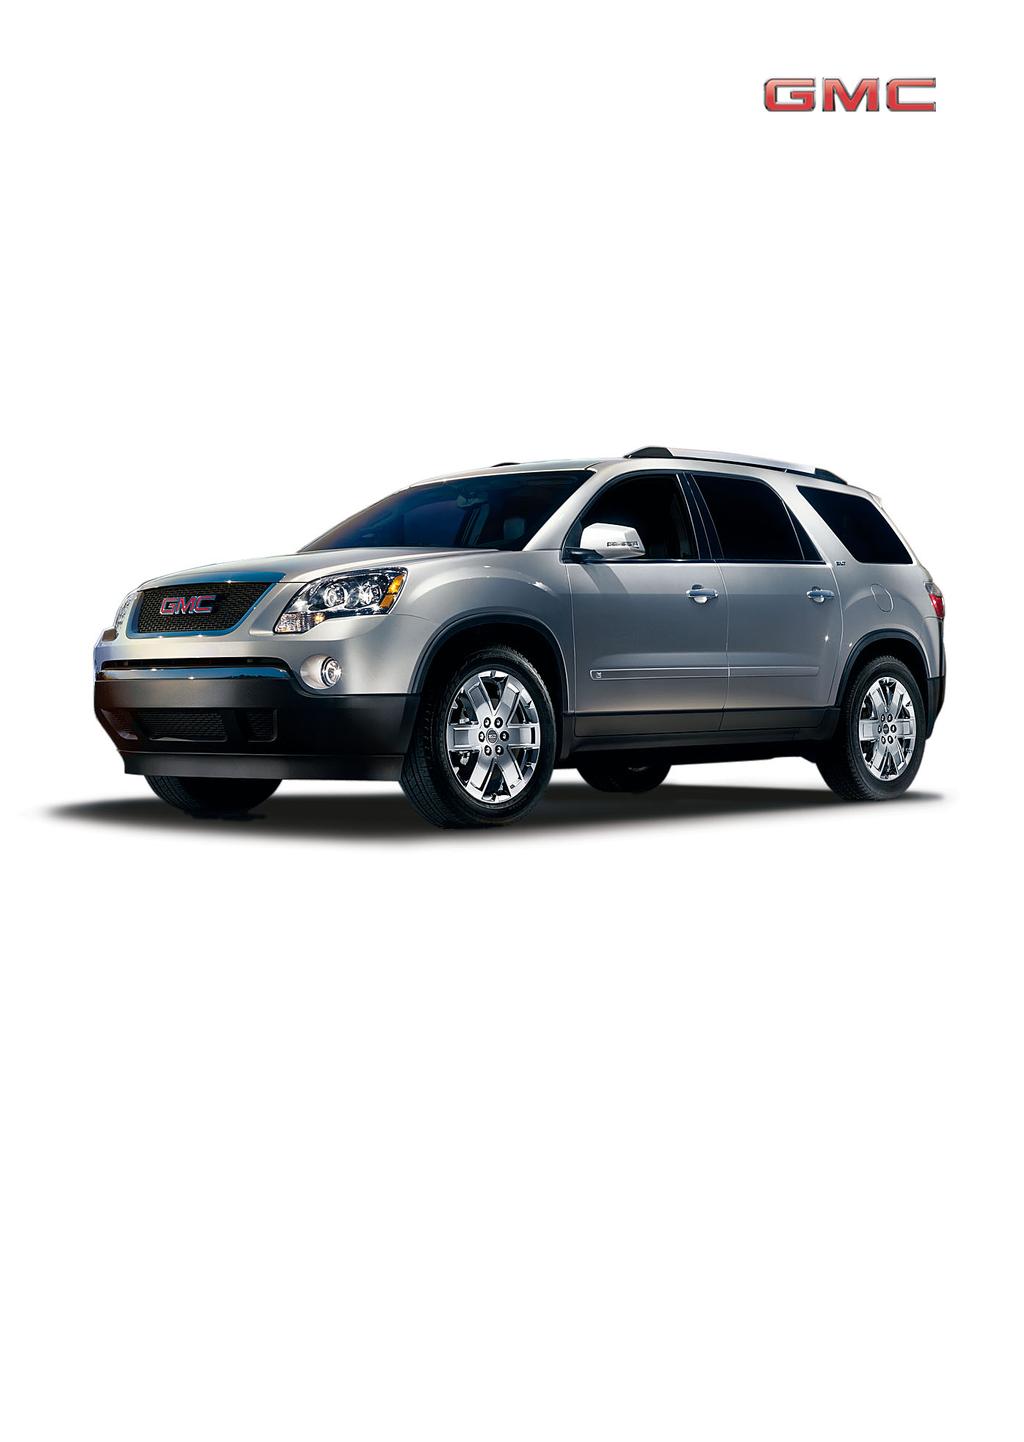 Getting to Know Your 2010 Acadia Review this Quick Reference Guide for an overview of some important features in your GMC Acadia. More detailed information can be found in your Owner Manual.